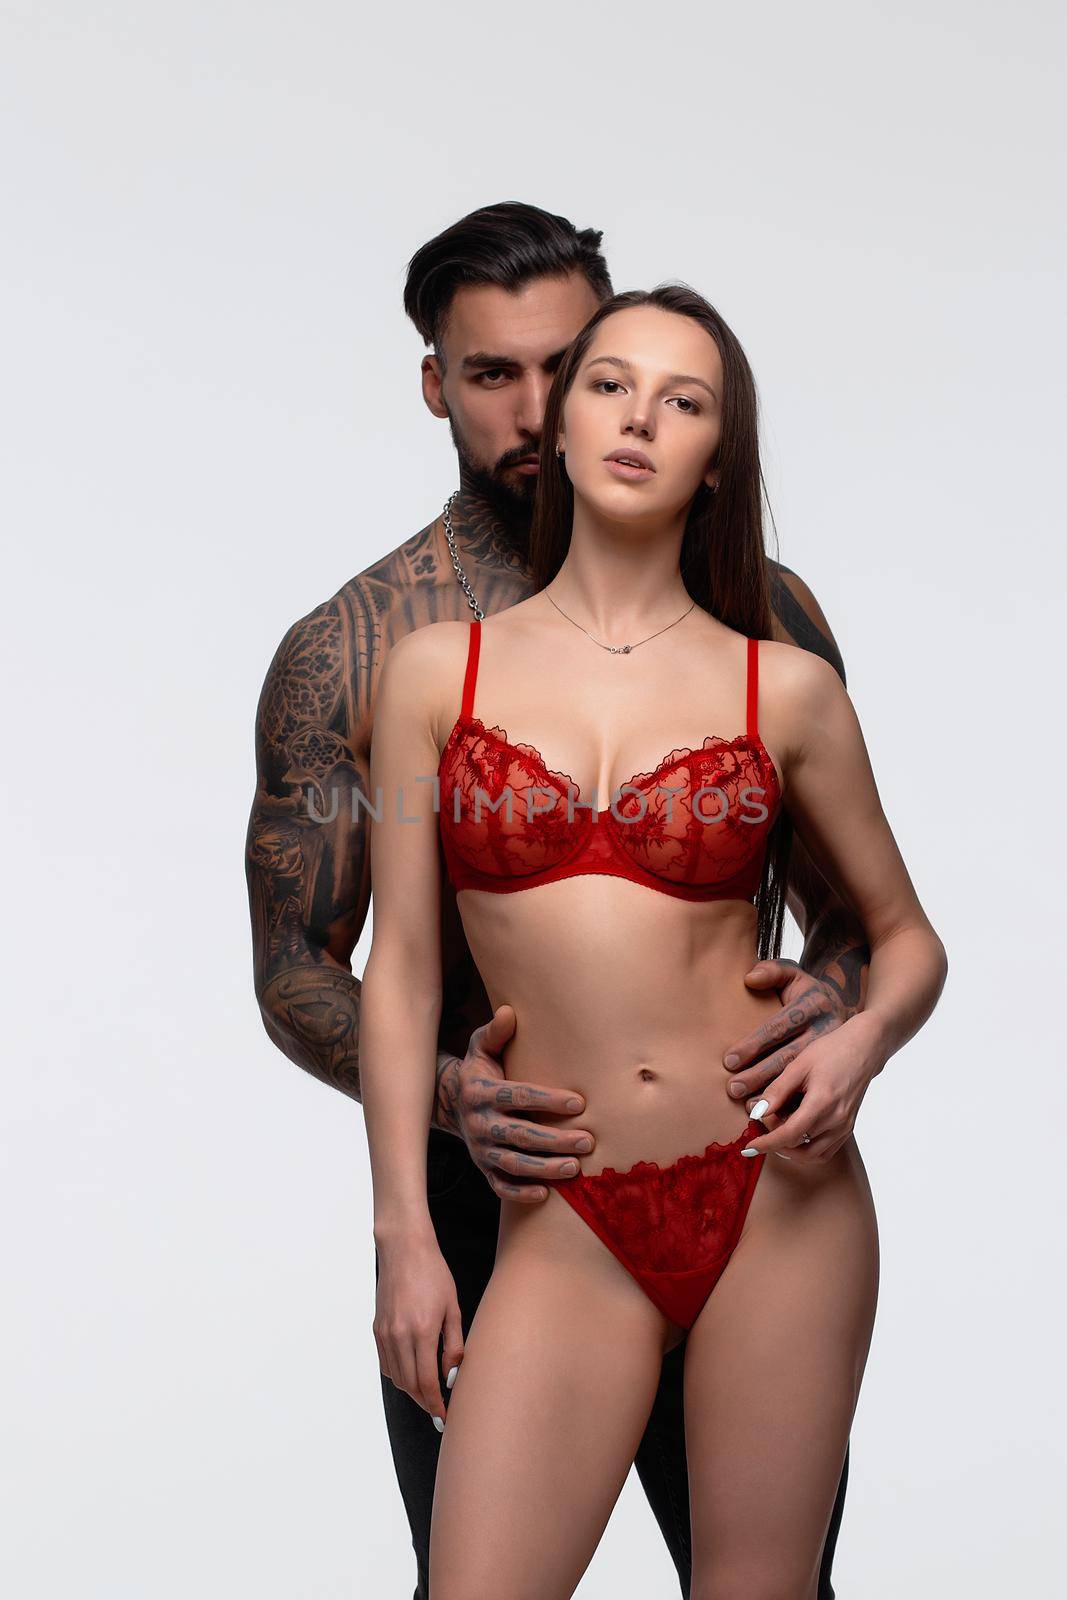 Confident tattooed bearded male standing with seductive female partner wearing red lace lingerie in studio and looking at camera